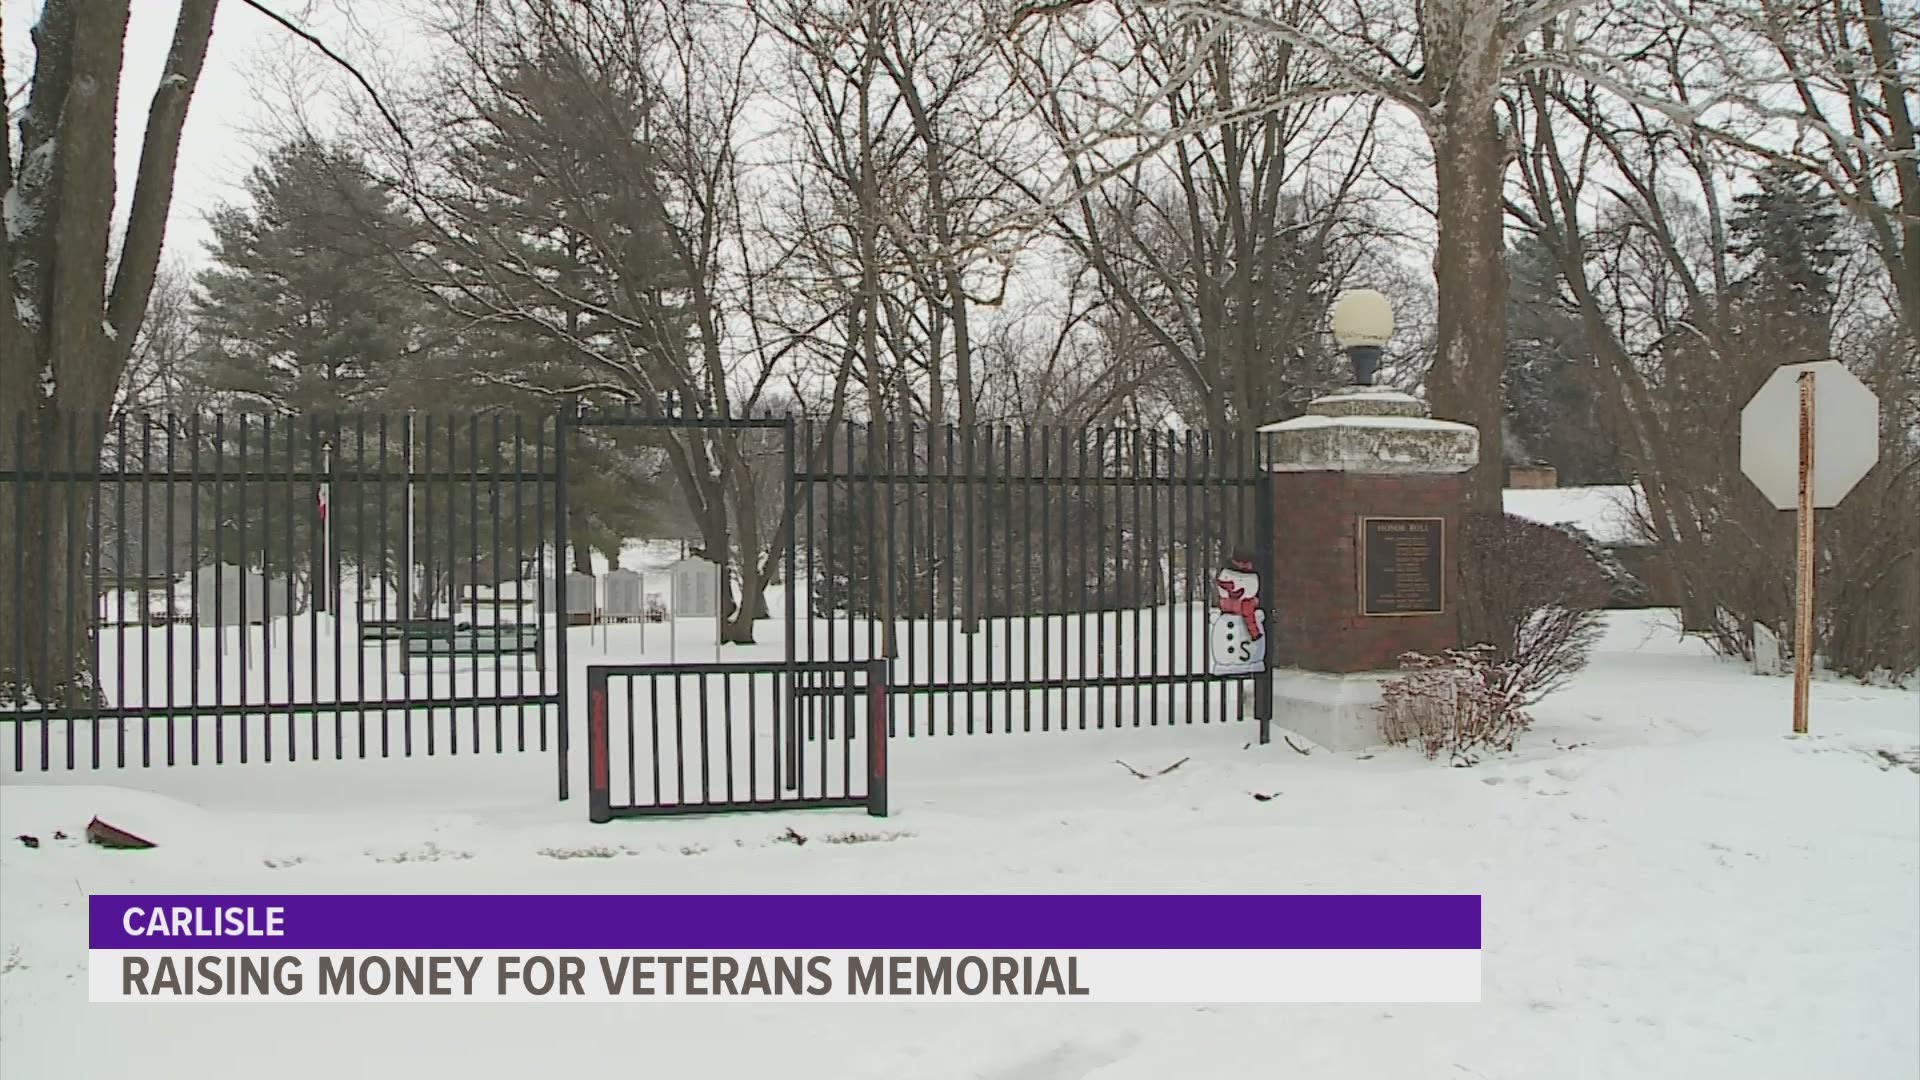 A memorial dating back to 1922 originally honored those who served in the World War I.